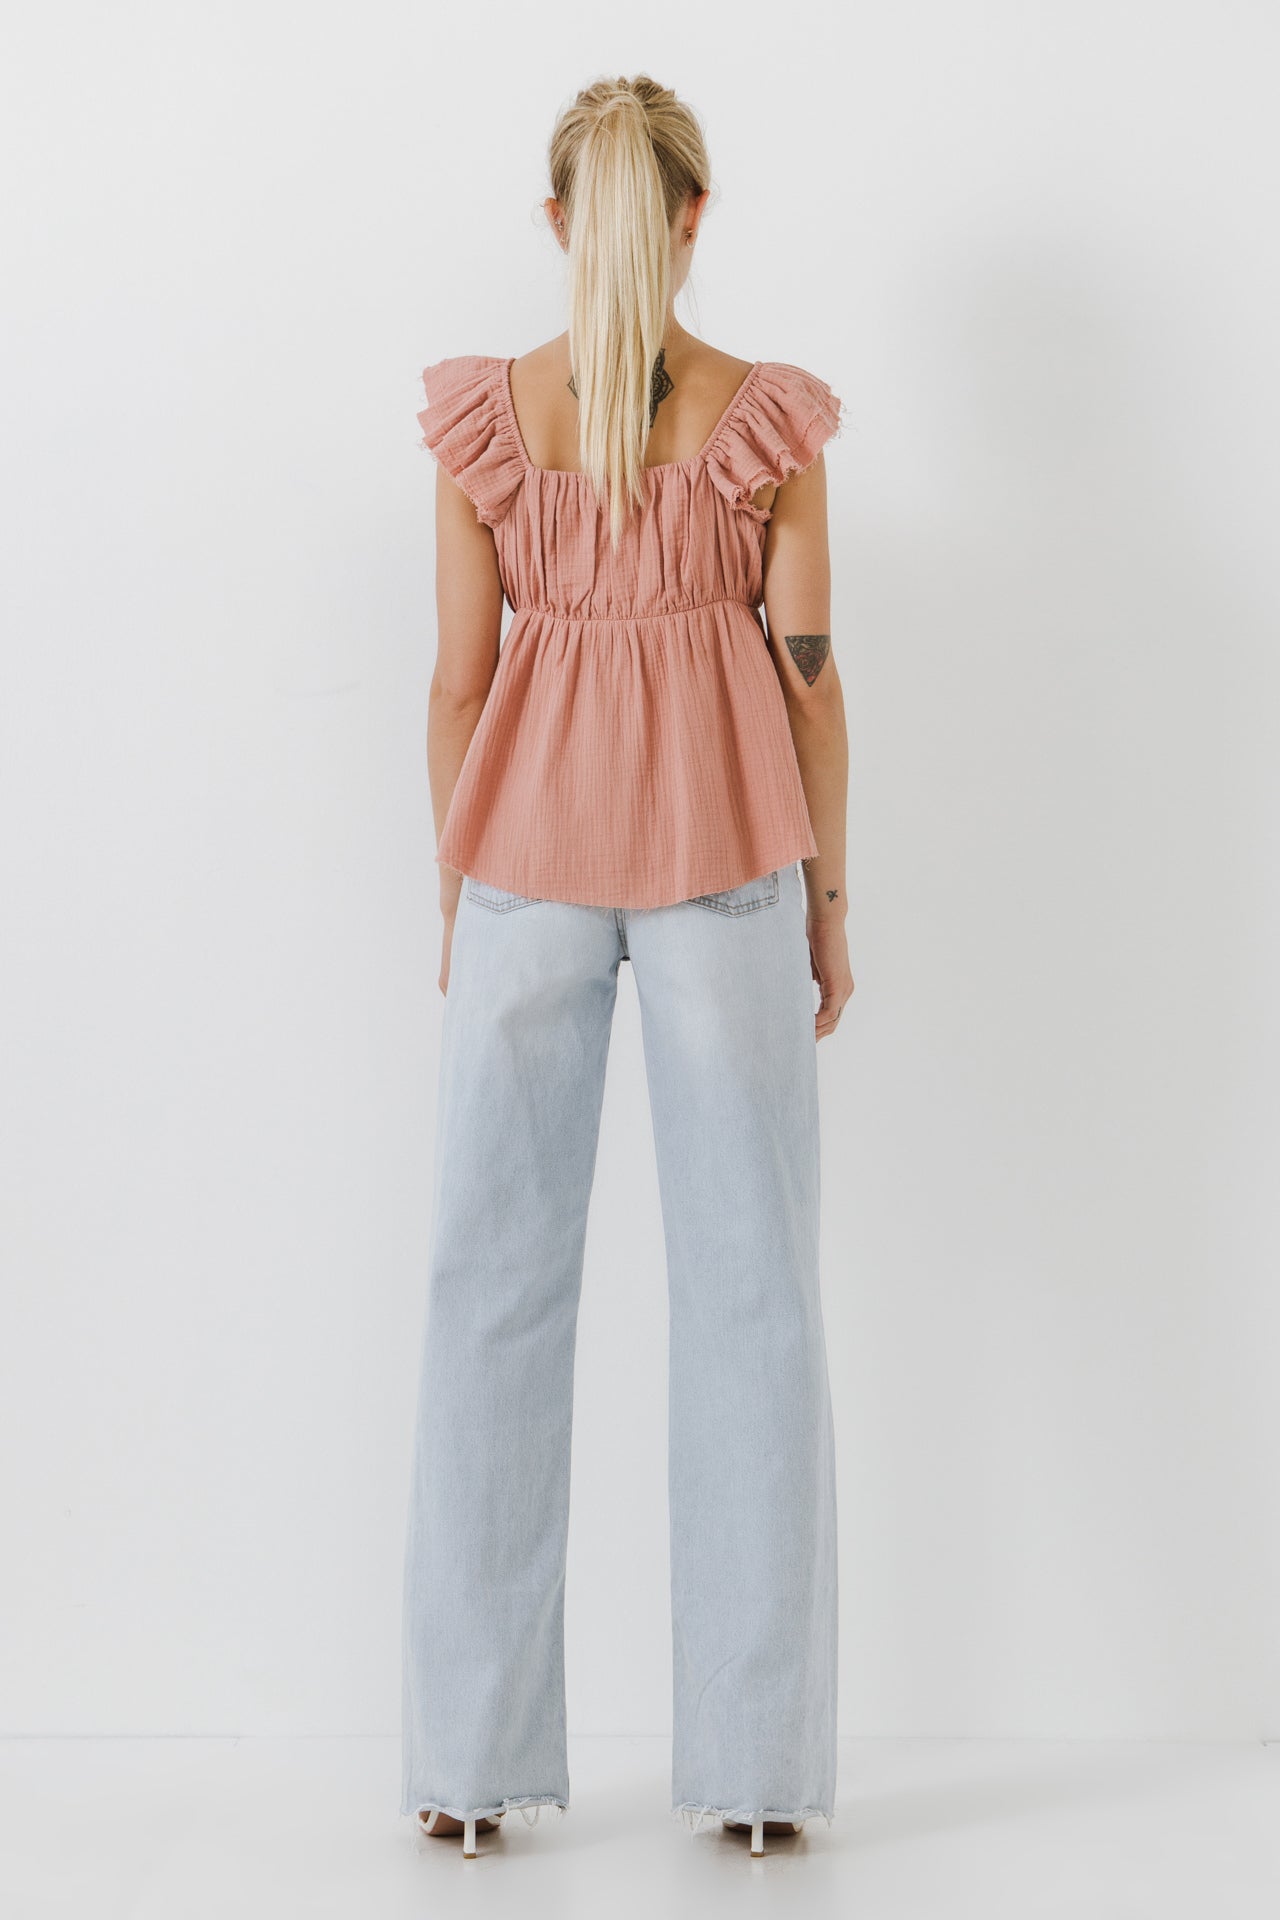 FREE THE ROSES - Sweet Heart Neck Raw Edge Top - TOPS available at Objectrare